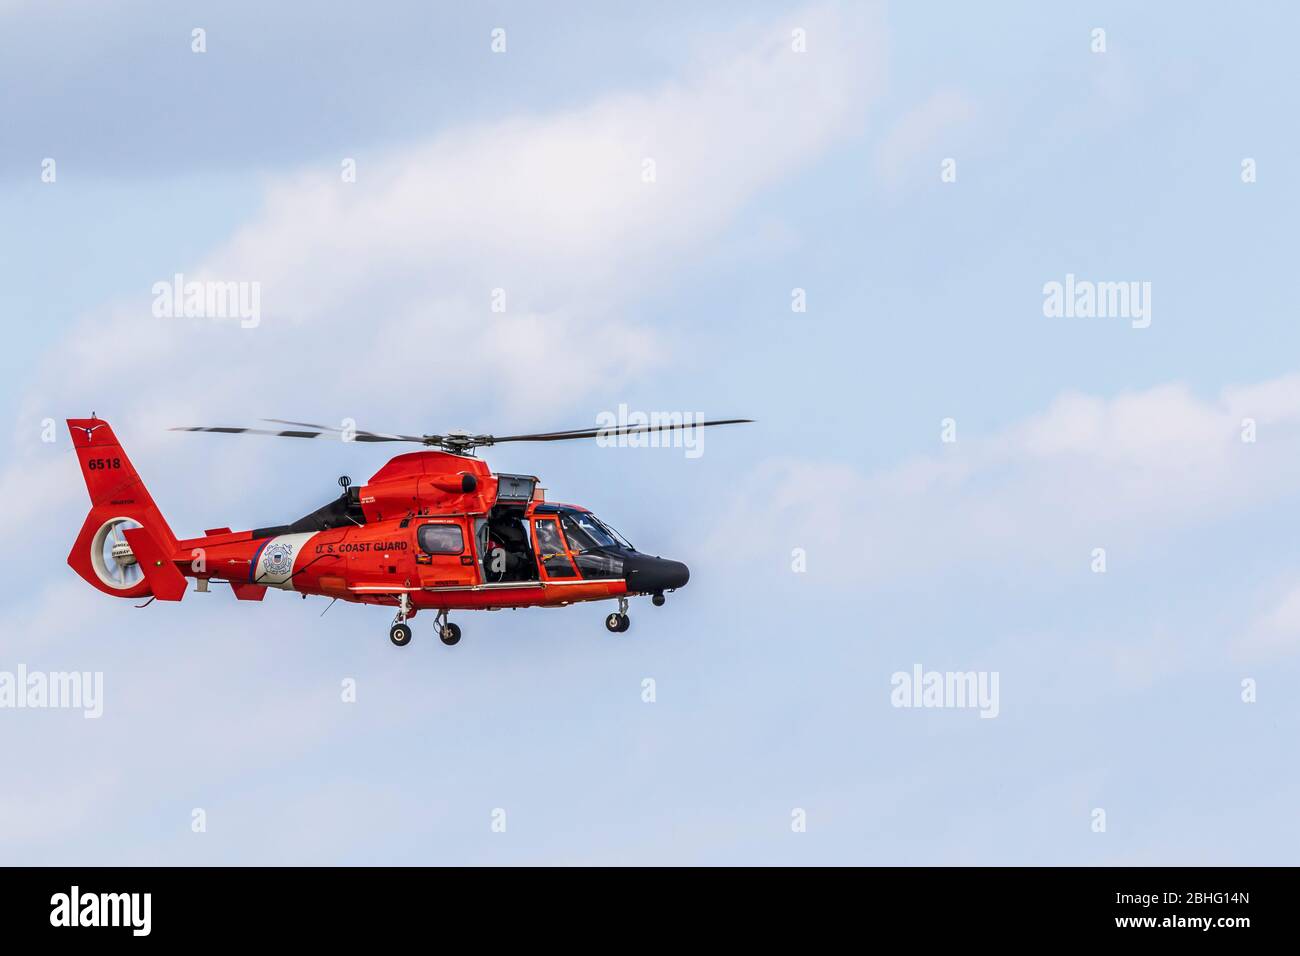 Us Coast Guard Mh 65 Dolphin Helicopter Search And Rescue Demonstration At 2019 Wings Over